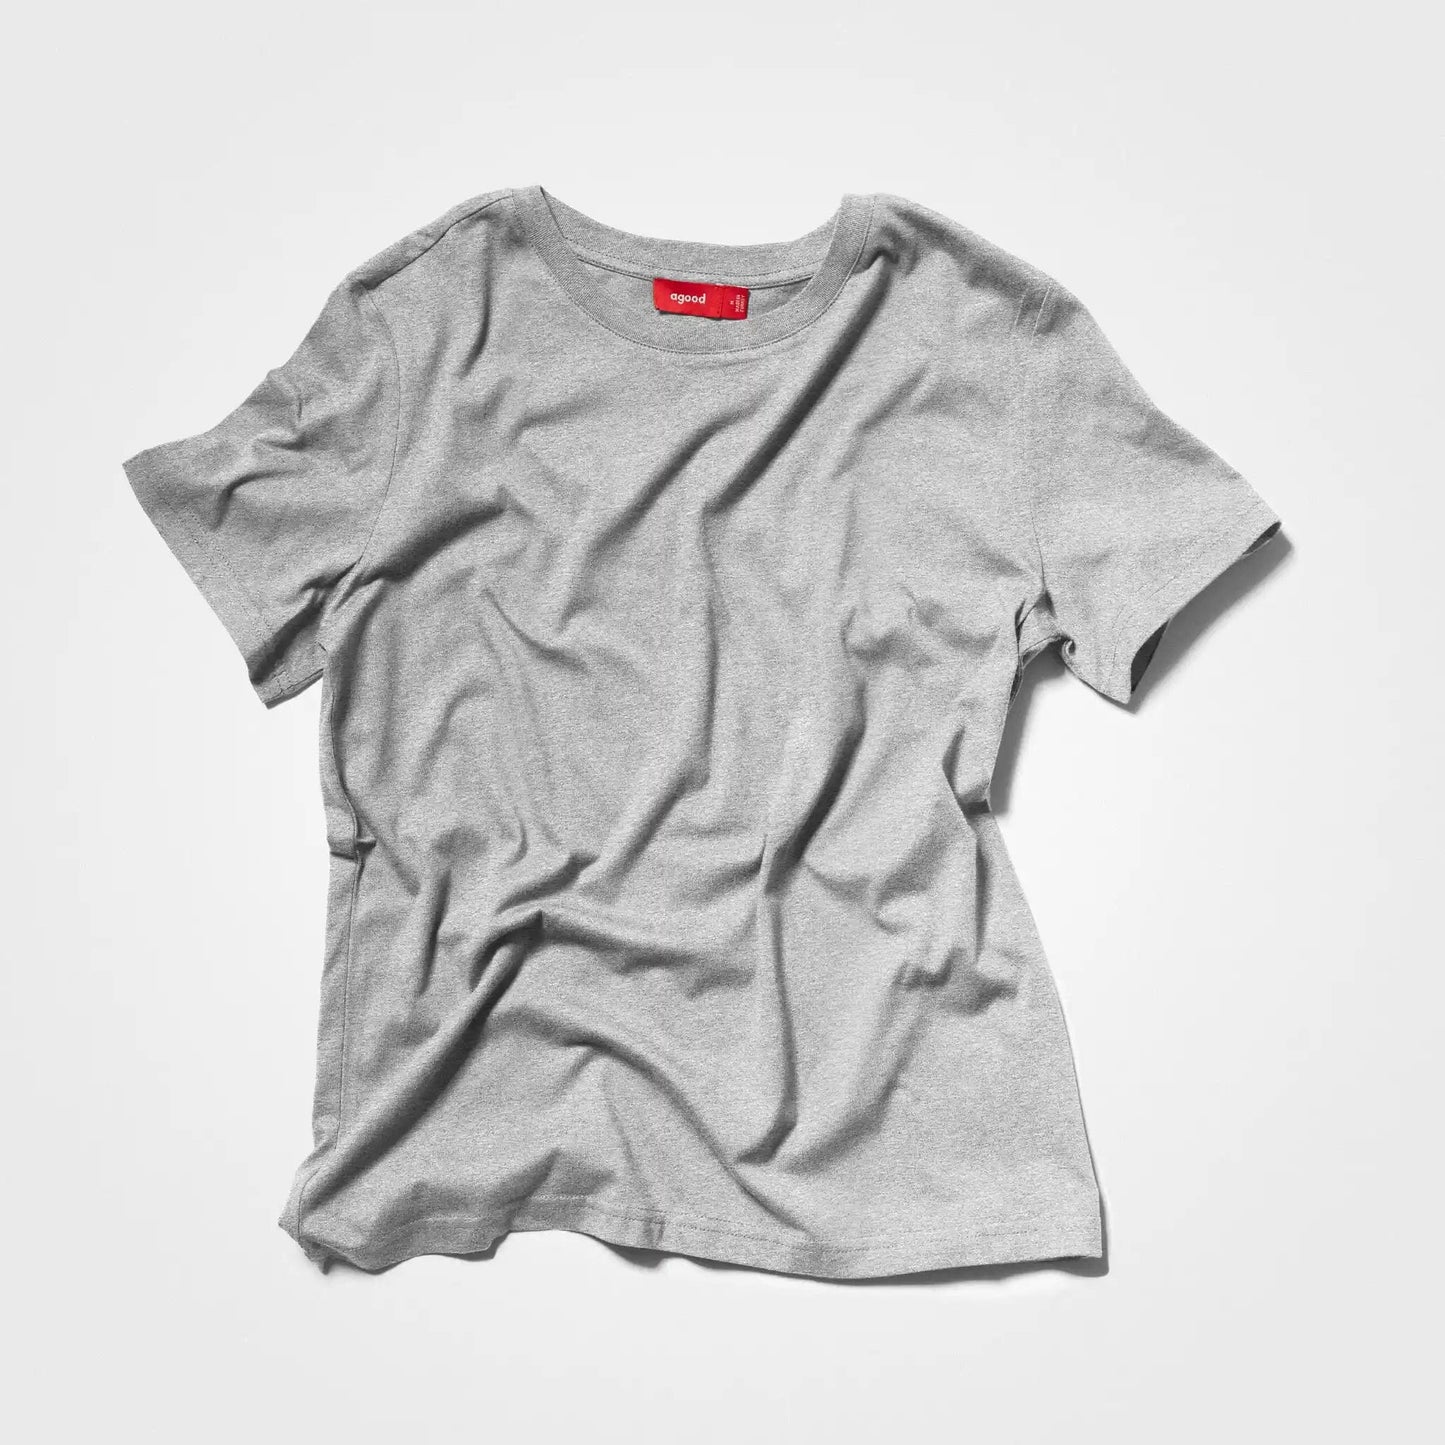 Women’s Recycled Cotton T-Shirt, Heather Grey